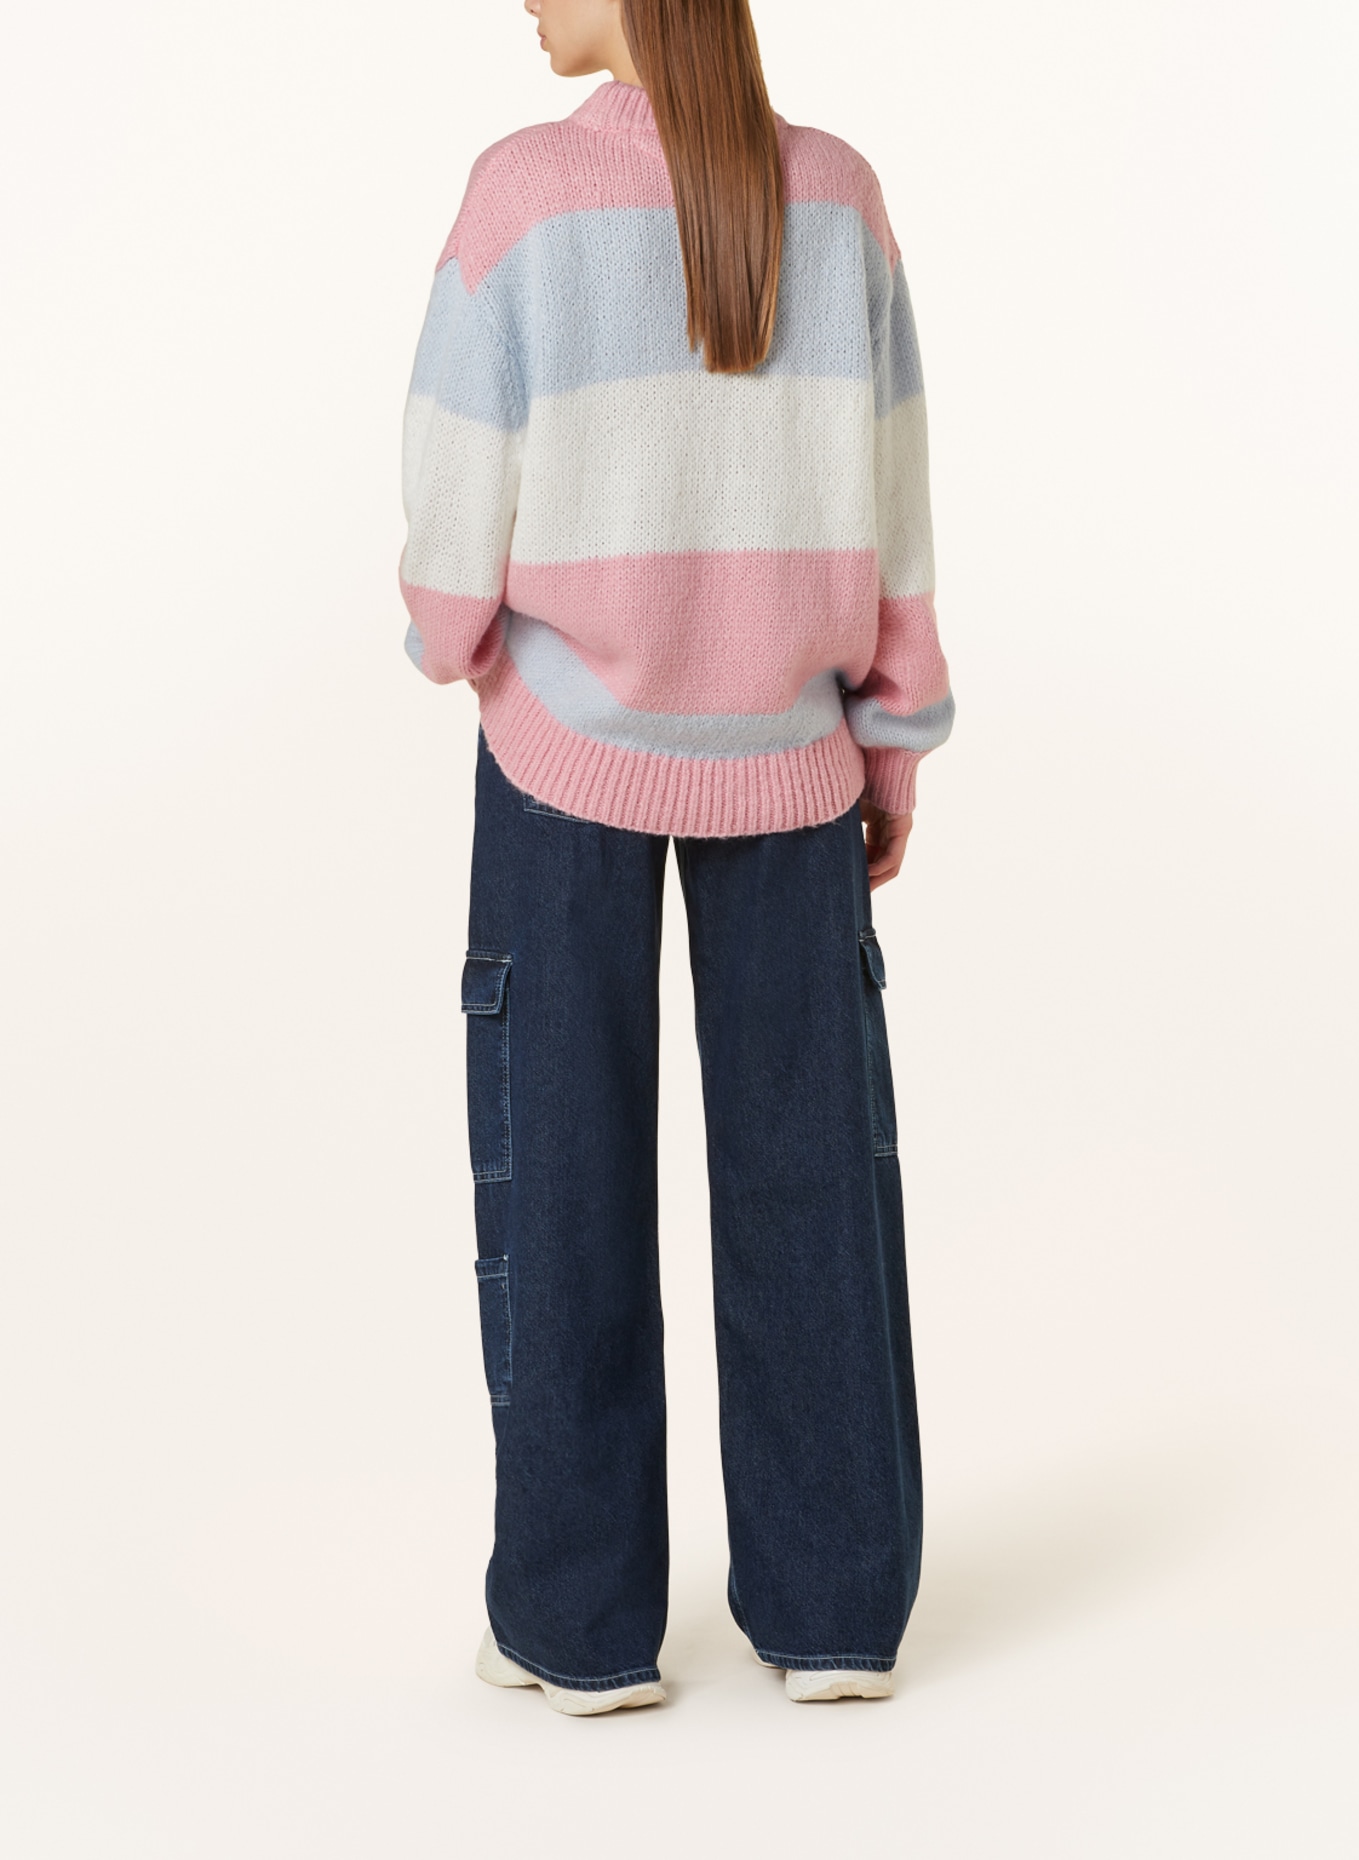 TOMMY JEANS Pullover, Farbe: ROSA/ HELLBLAU/ WEISS (Bild 3)